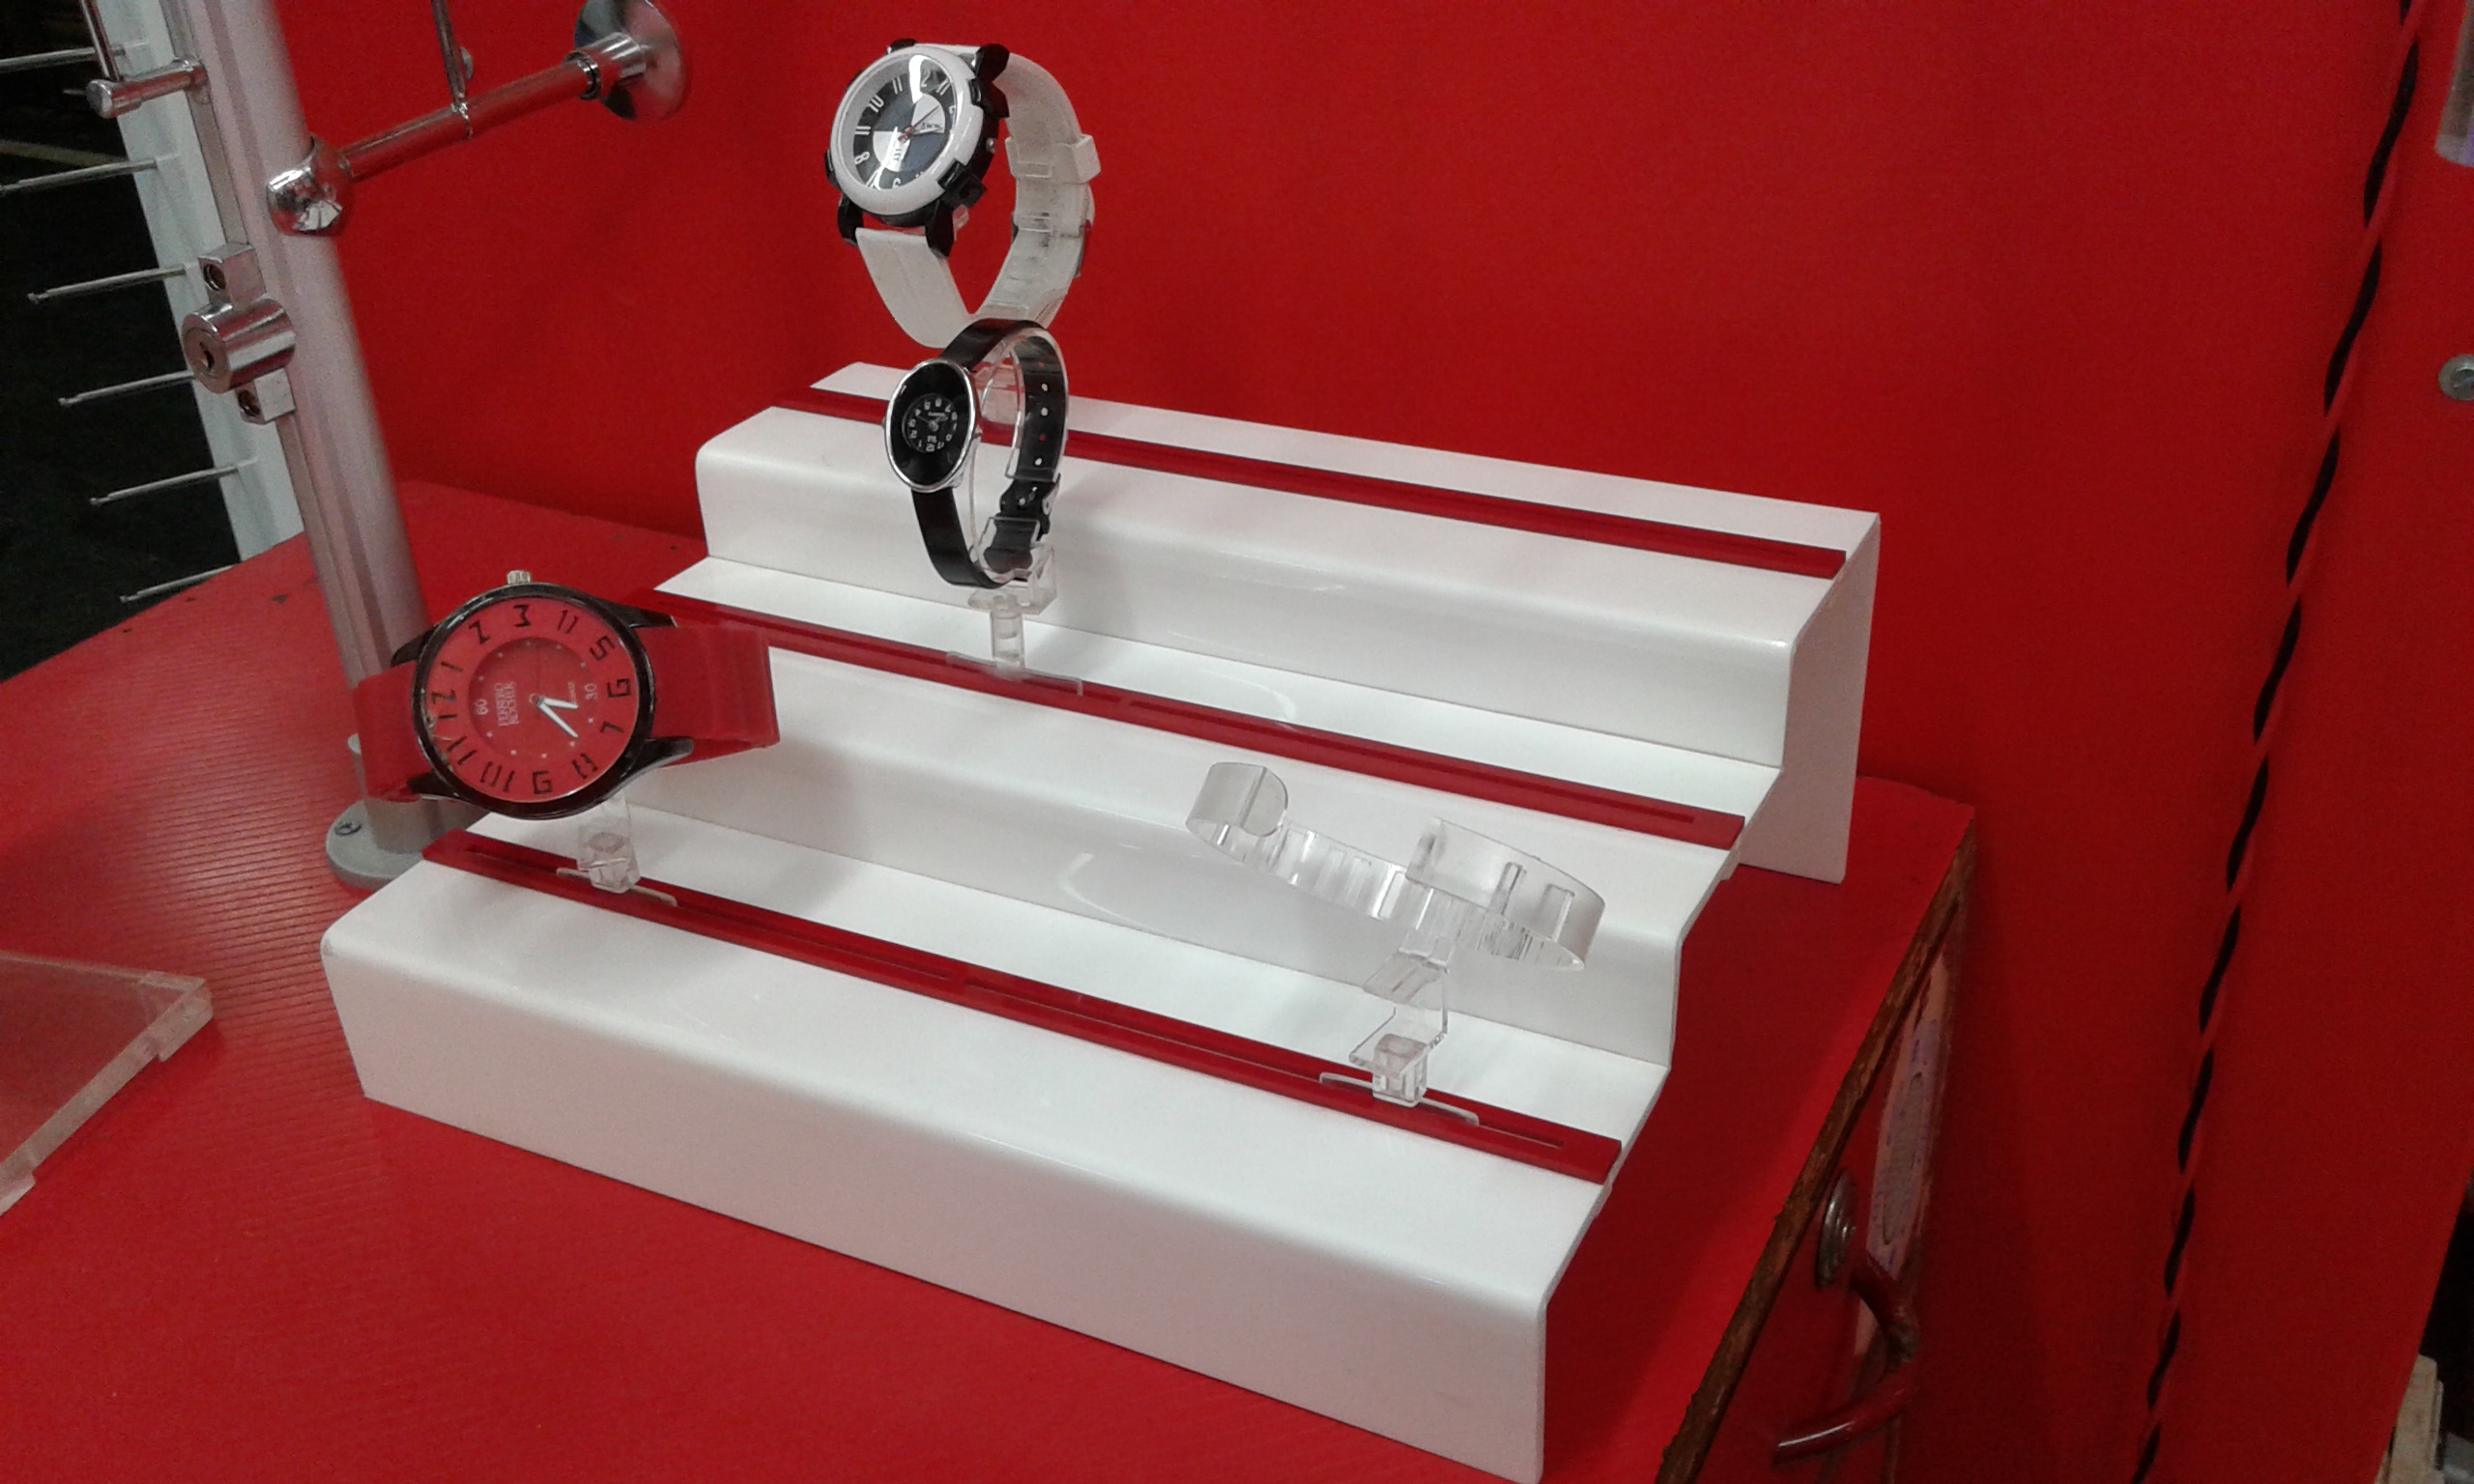 Staired Type Watch Stand